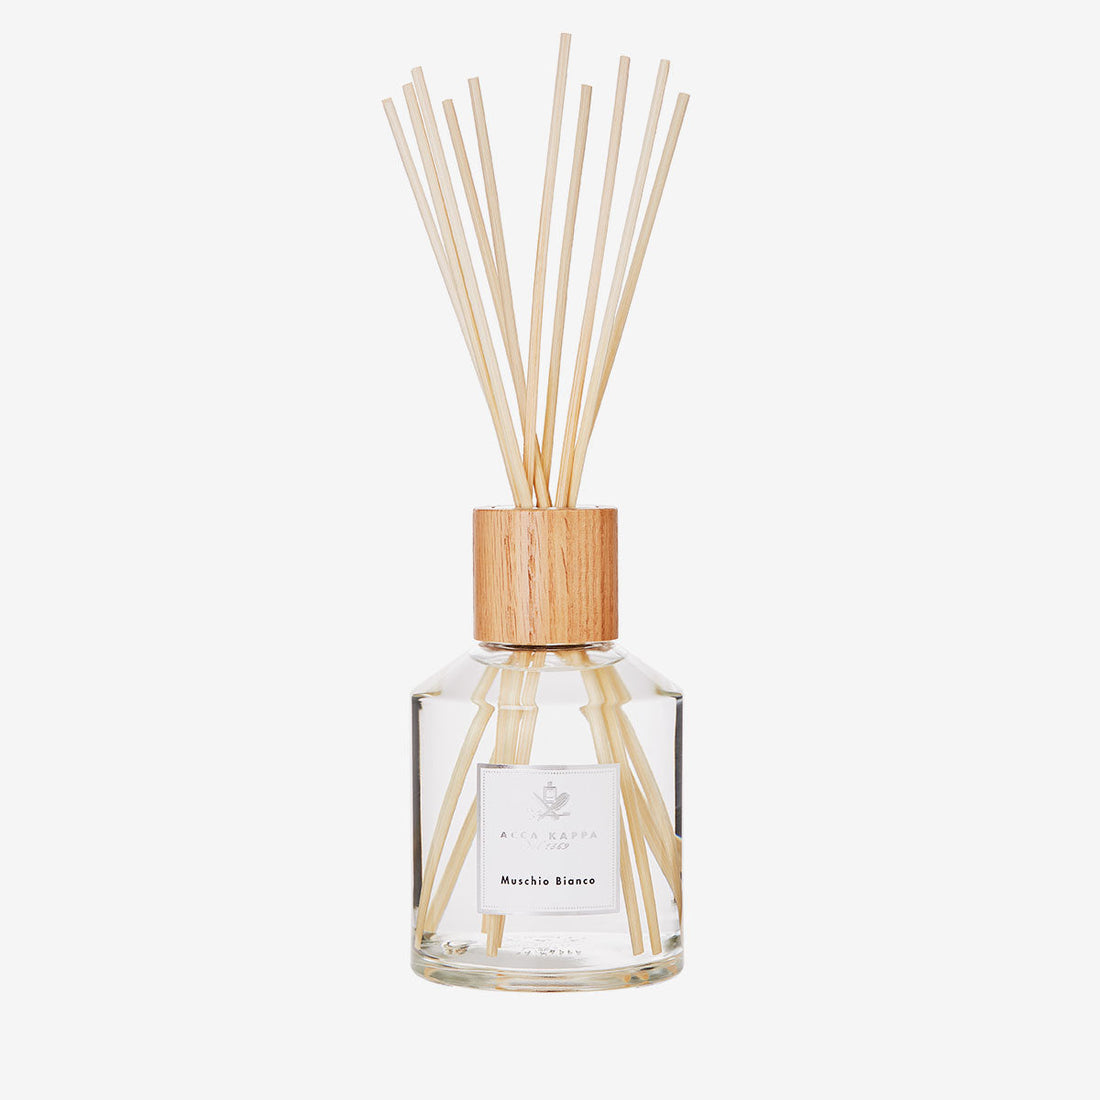 ACCA KAPPA White Moss Home Diffuser with Sticks